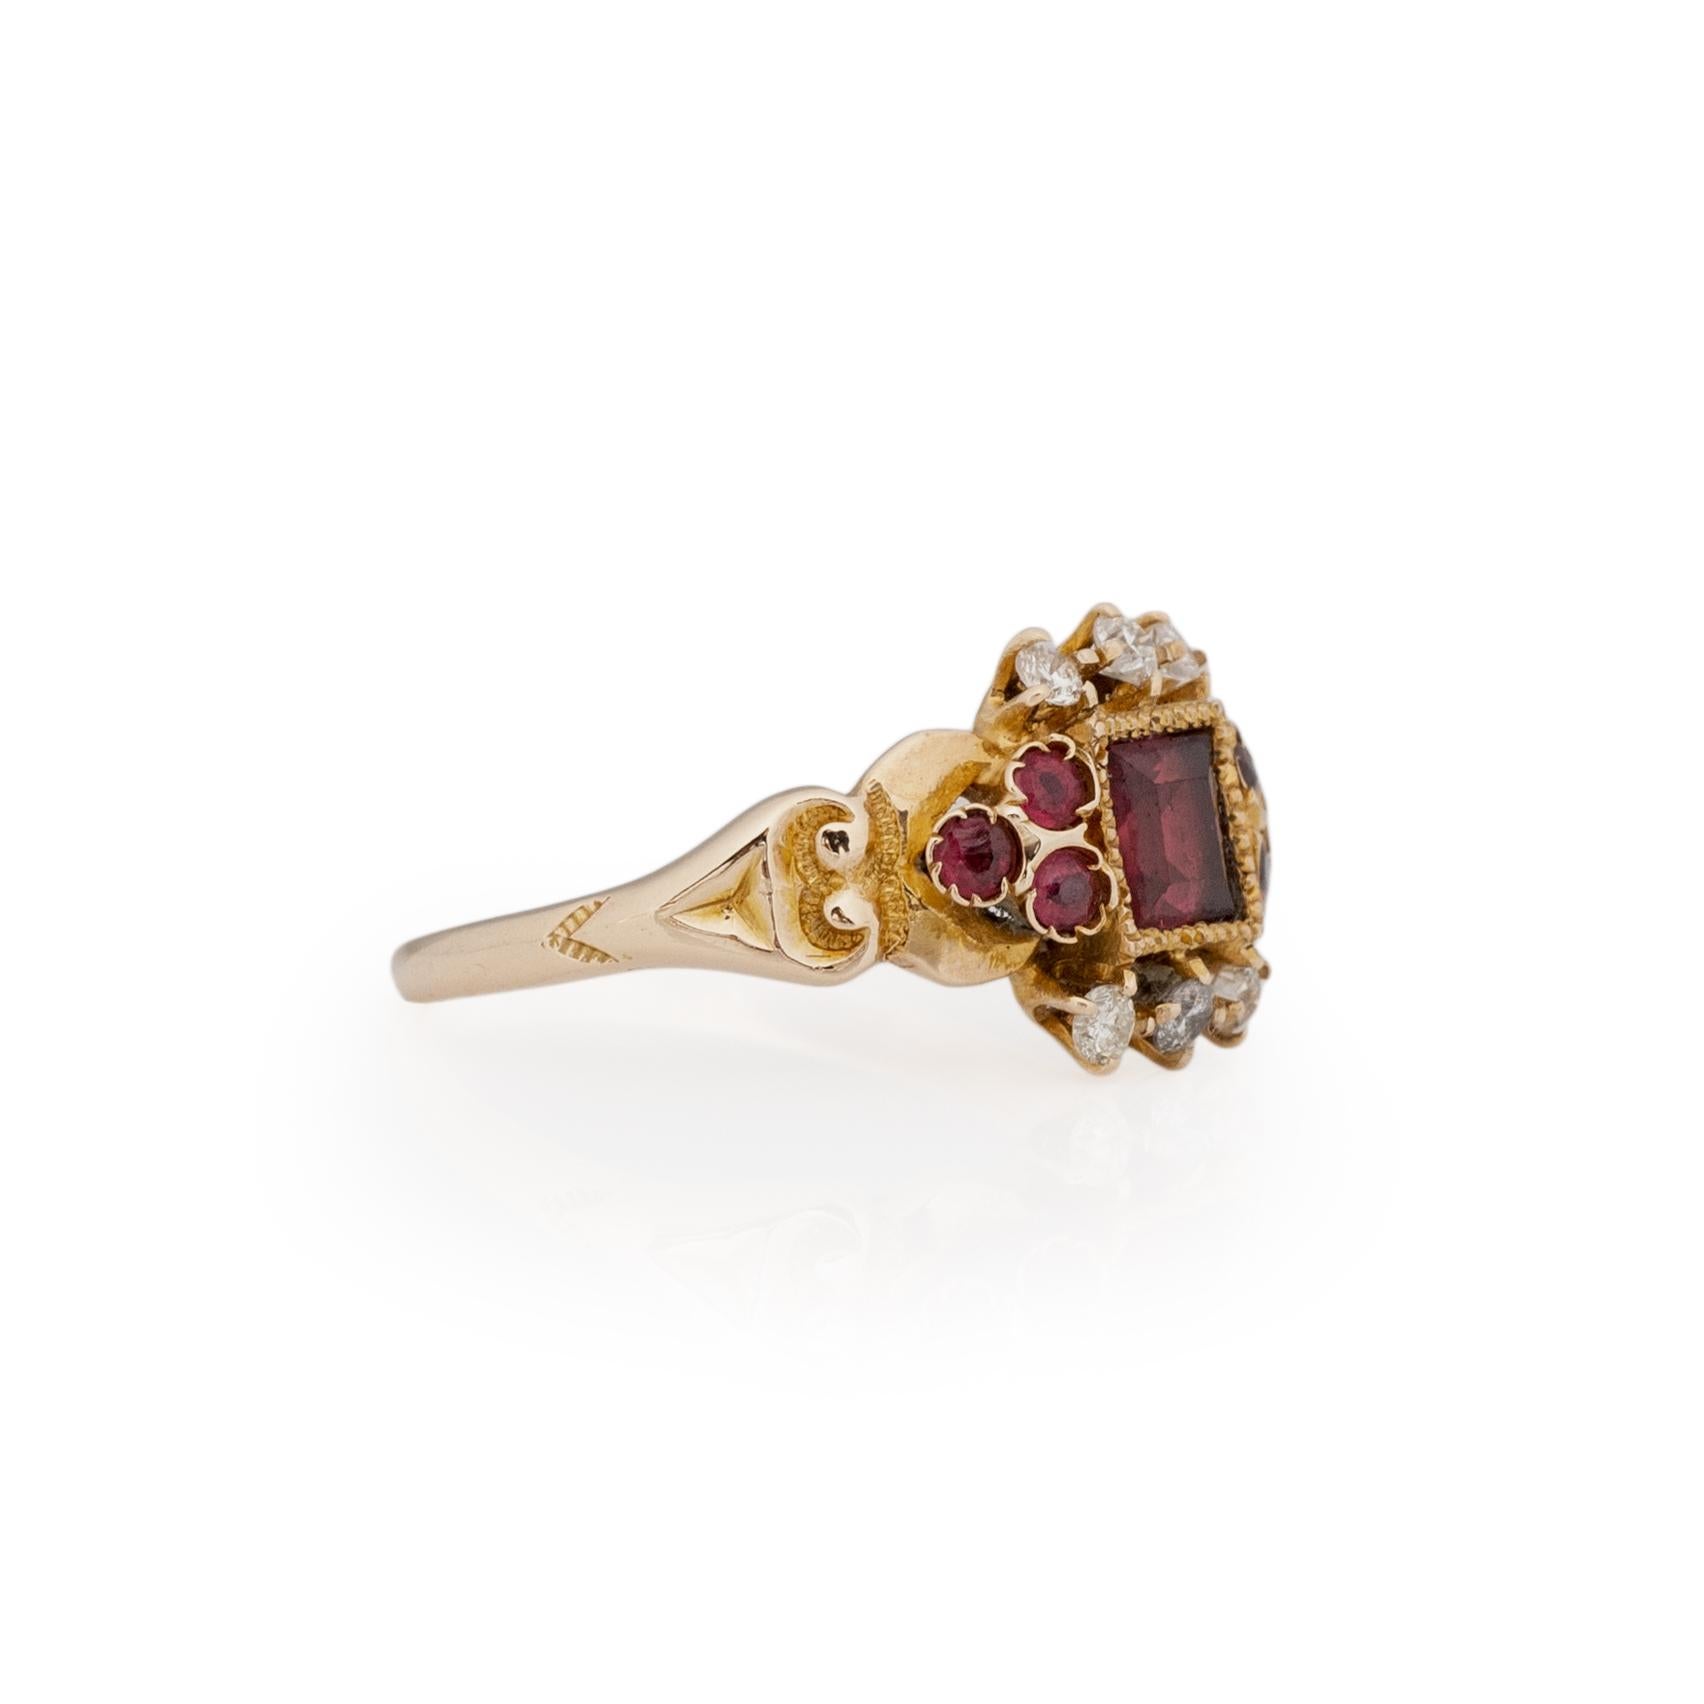 This Victorian beauty is fit for a queen. Crafted in 10K yellow gold, this beauty has eye catching details and classic color. Heading up the tapered shanks are hand carved scroll work designs that resembles hearts. In the center is a square step cut